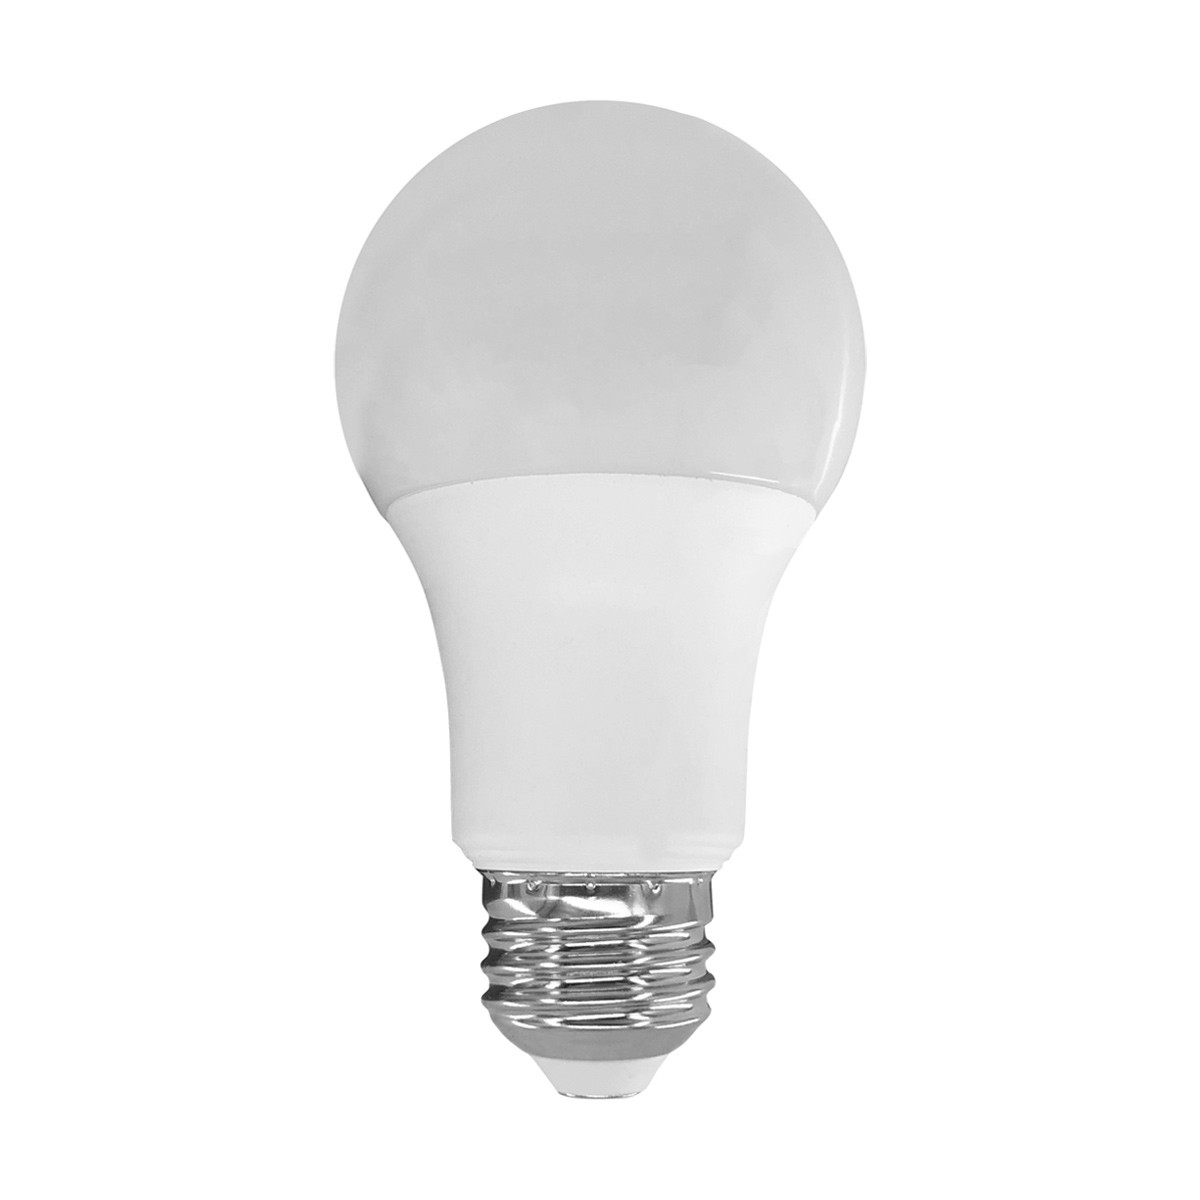 reEco LED Soft White A19 Light Bulb, 100W Replacement, 1 Pack